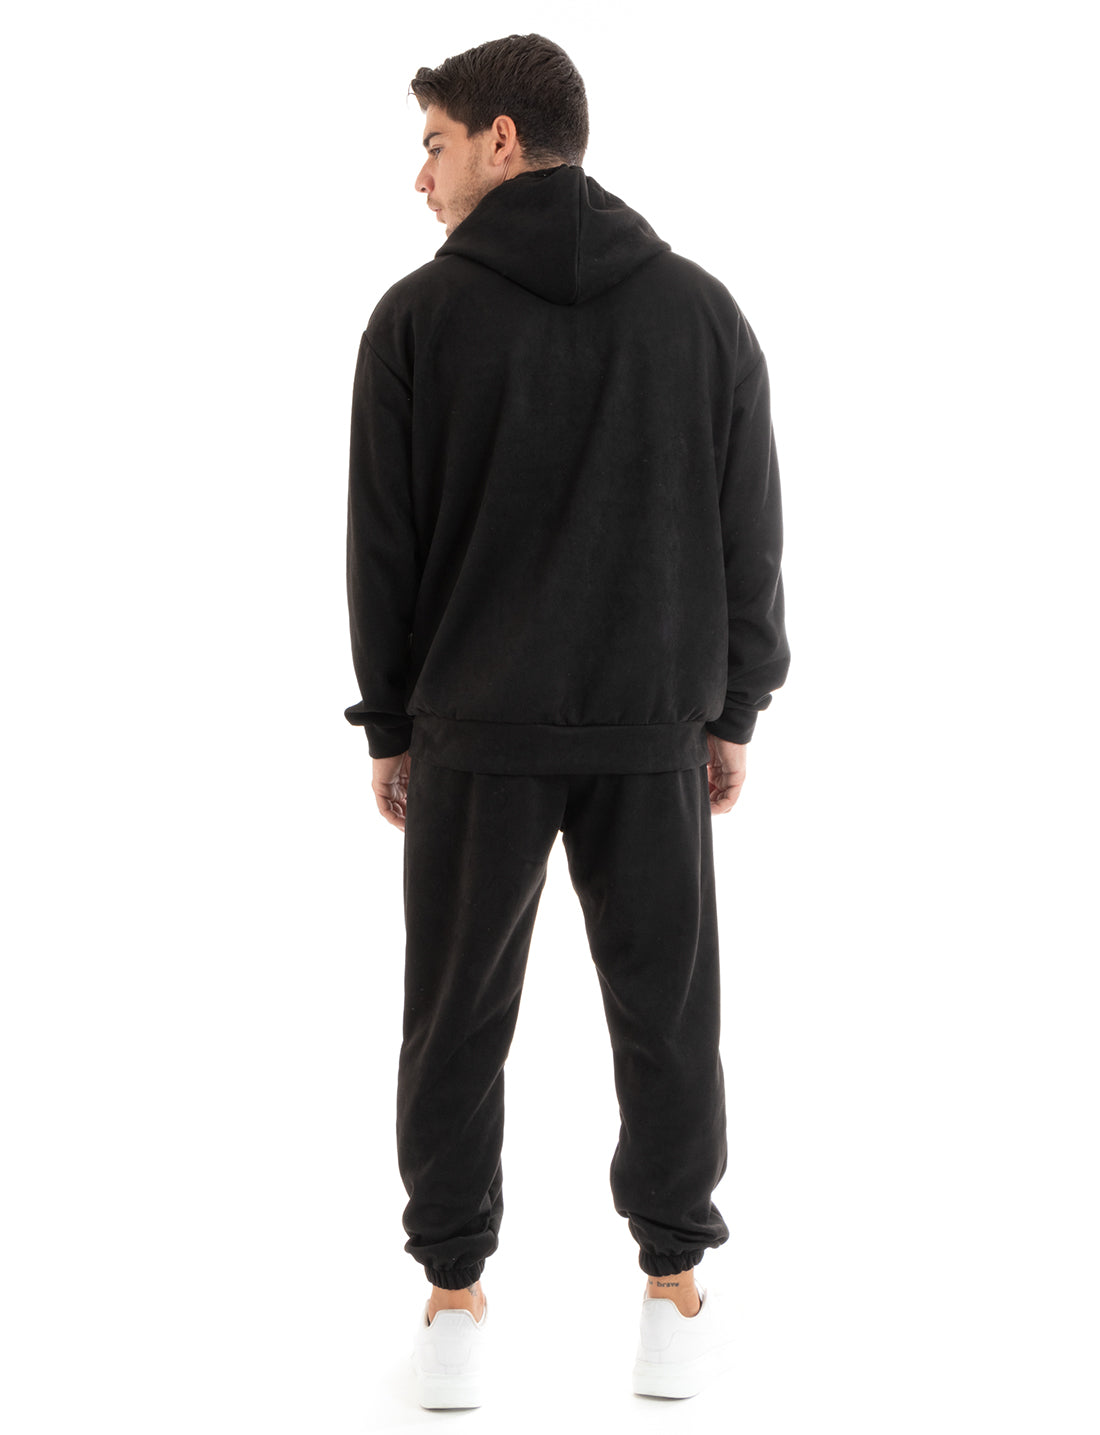 Men's Tracksuit Set with Hood and Zip Trousers with Drawstring Waist in Black Eco Suede GIOSAL-OU2396A